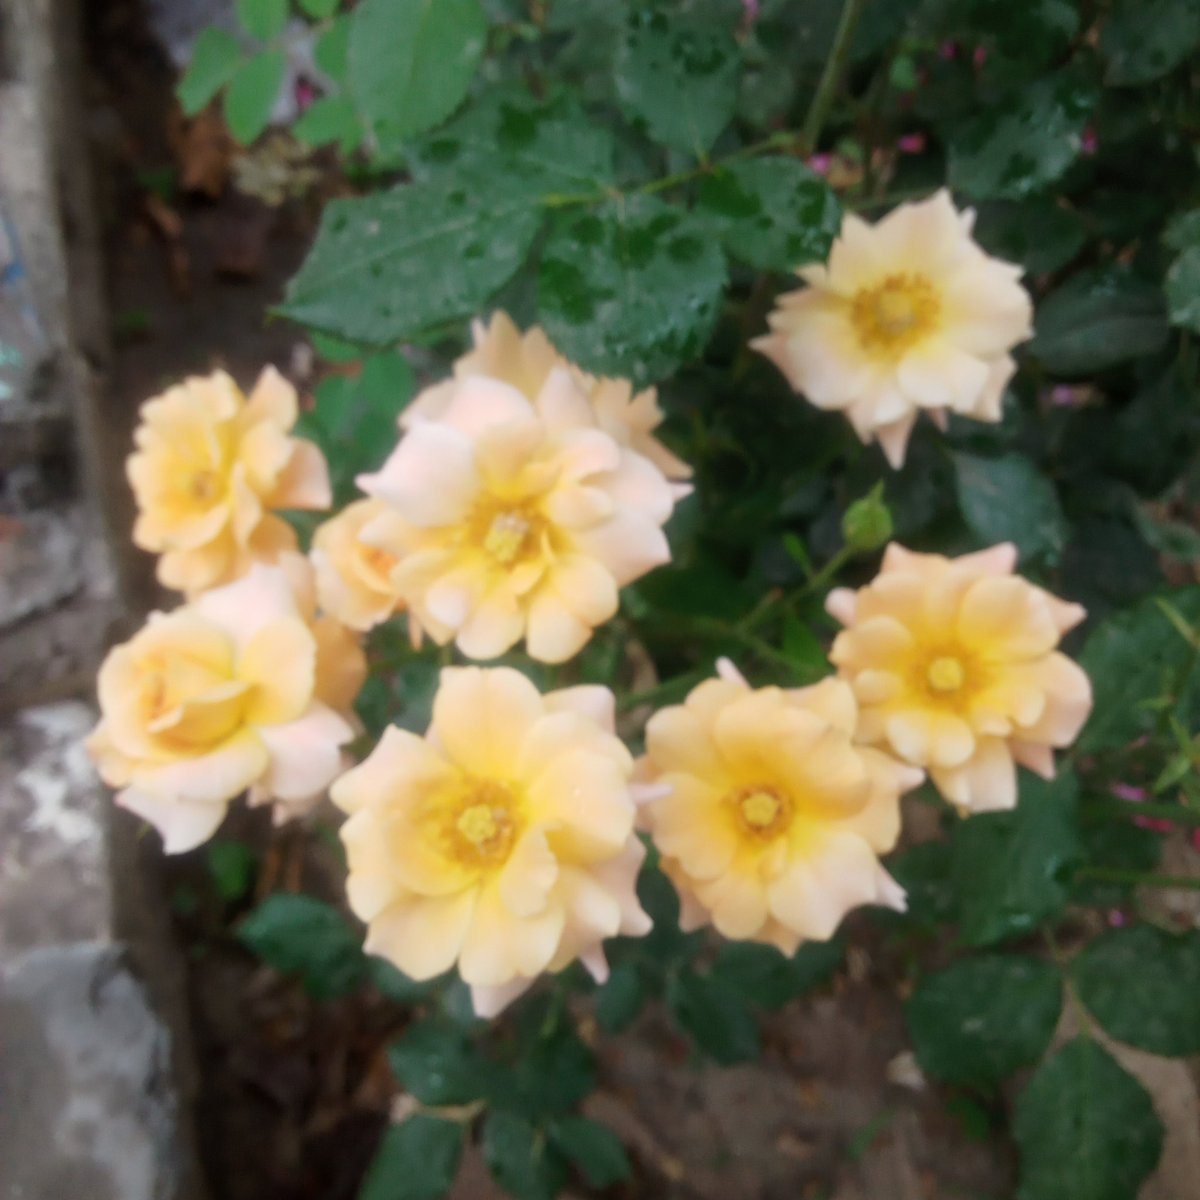 Quote with Yellow Roses 💐

Beauty of nature